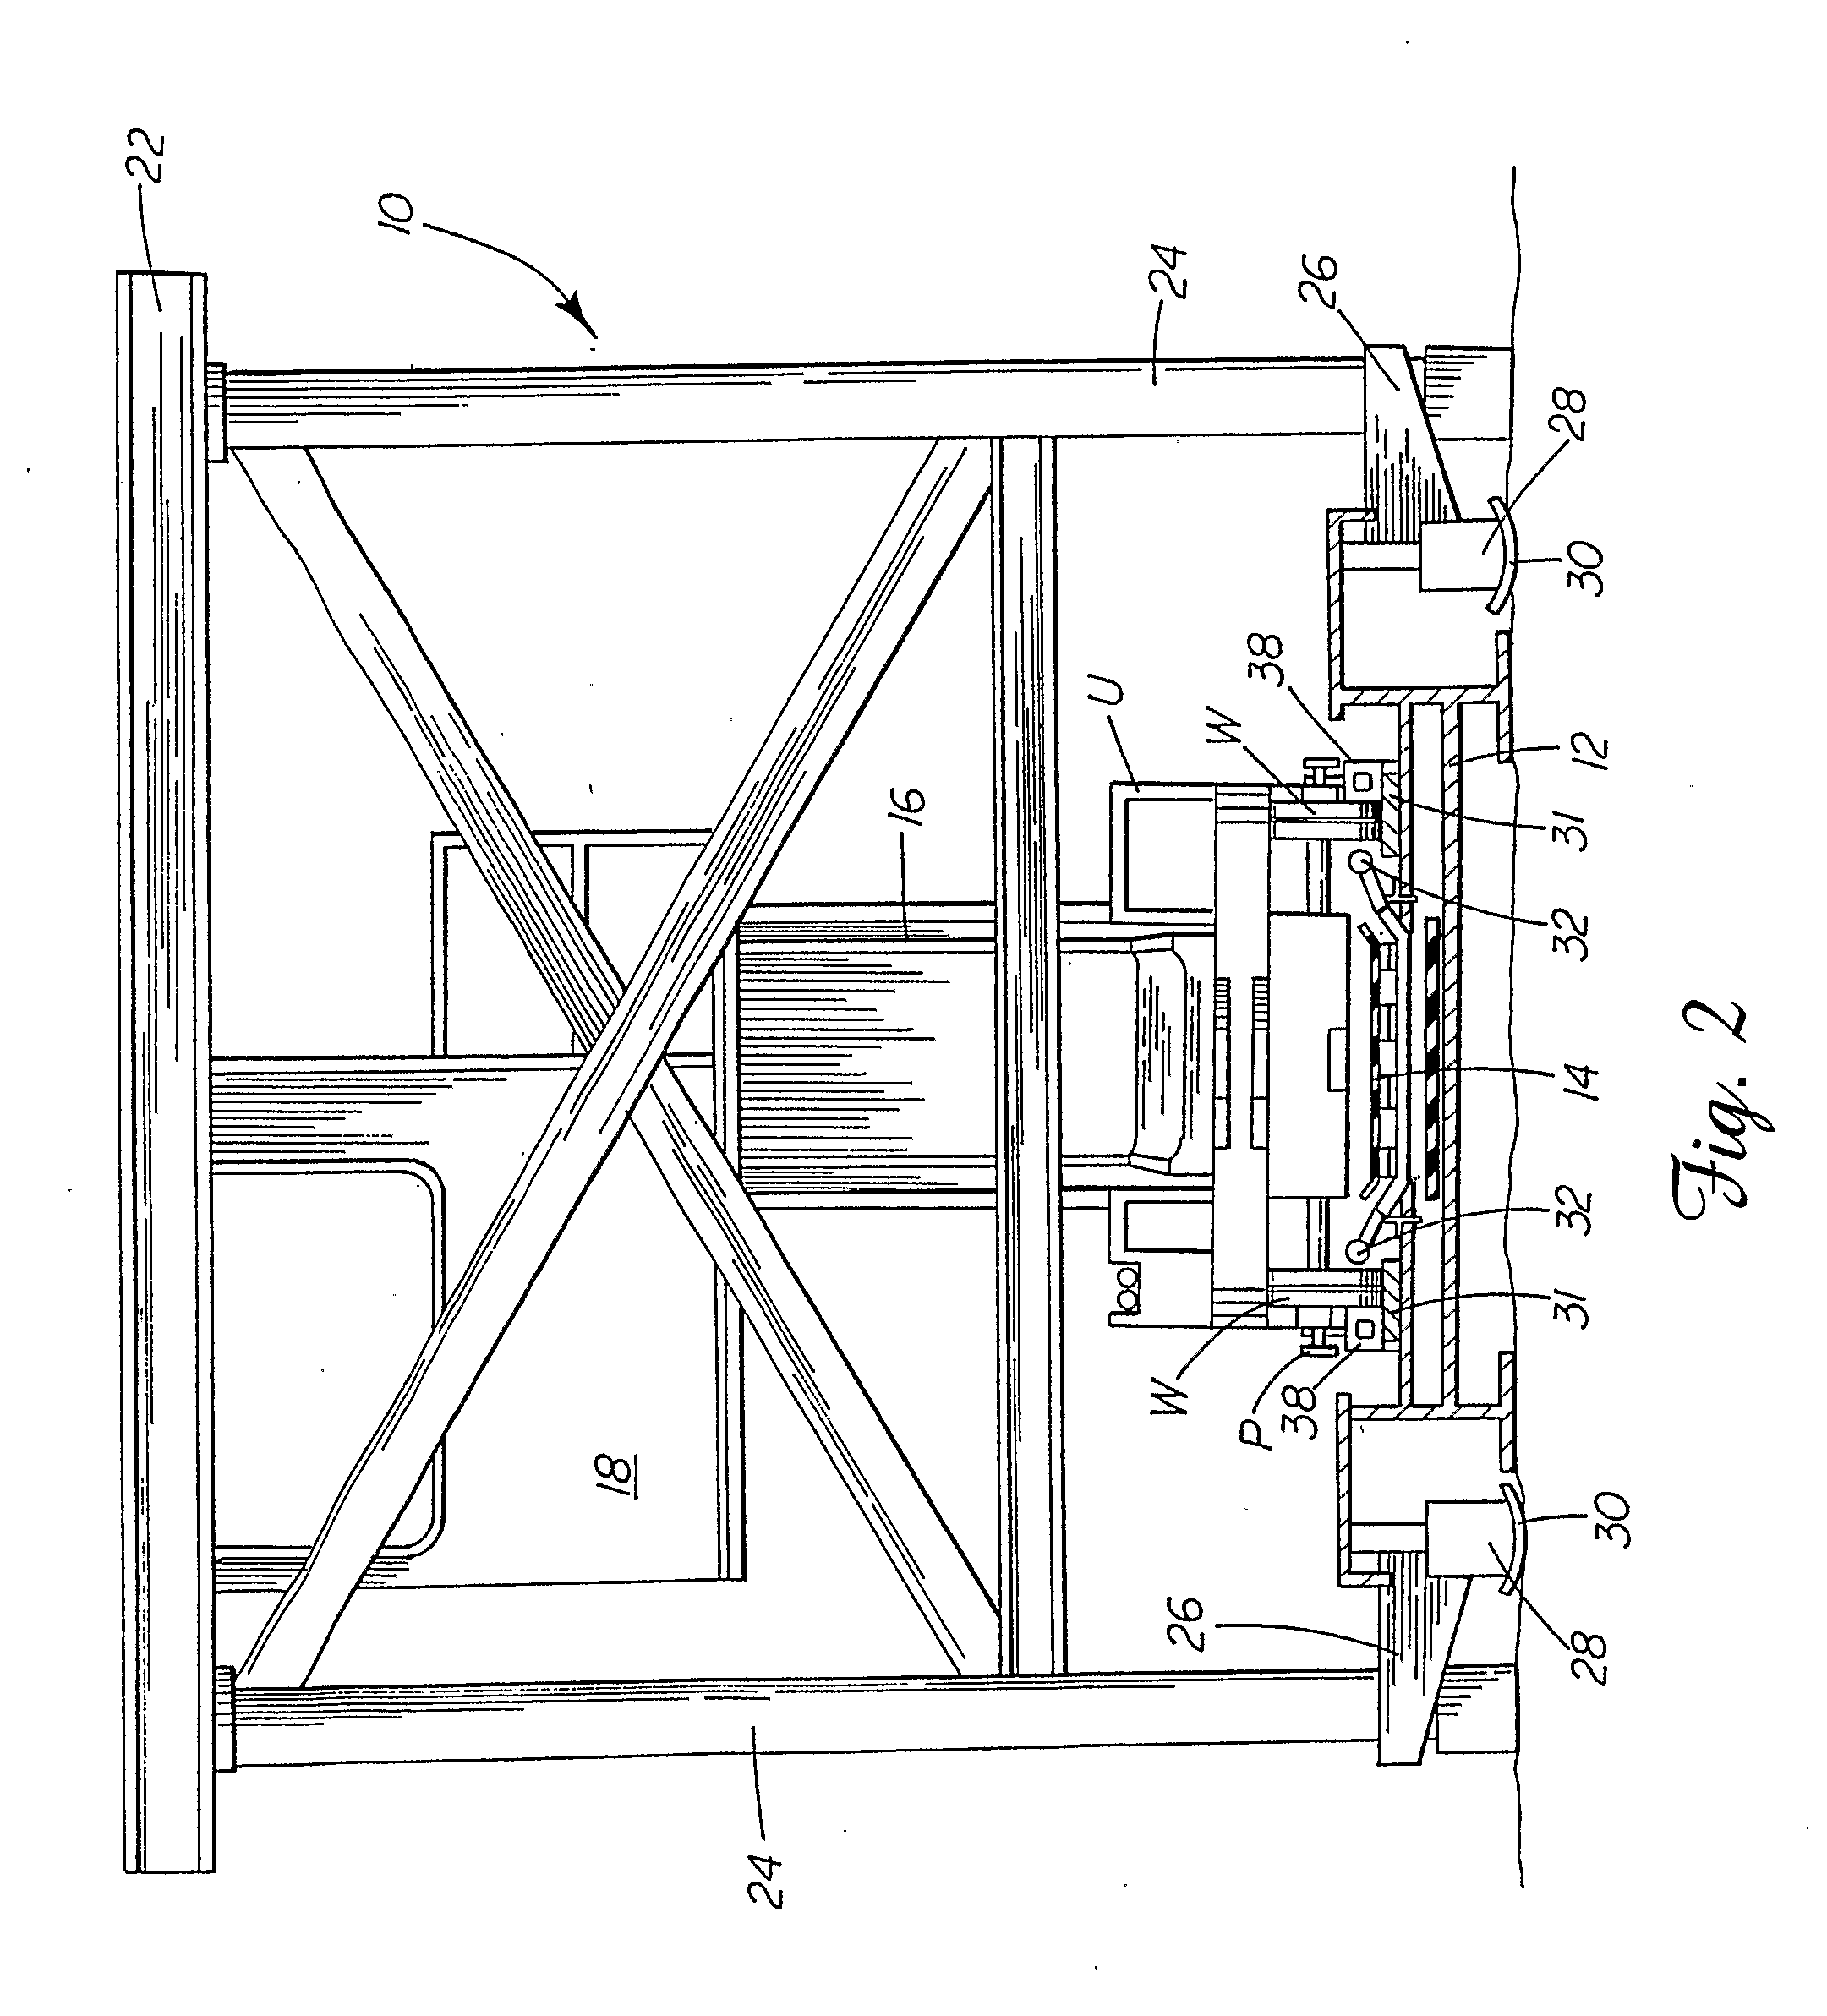 Mining Apparatus With Precision Navigation System